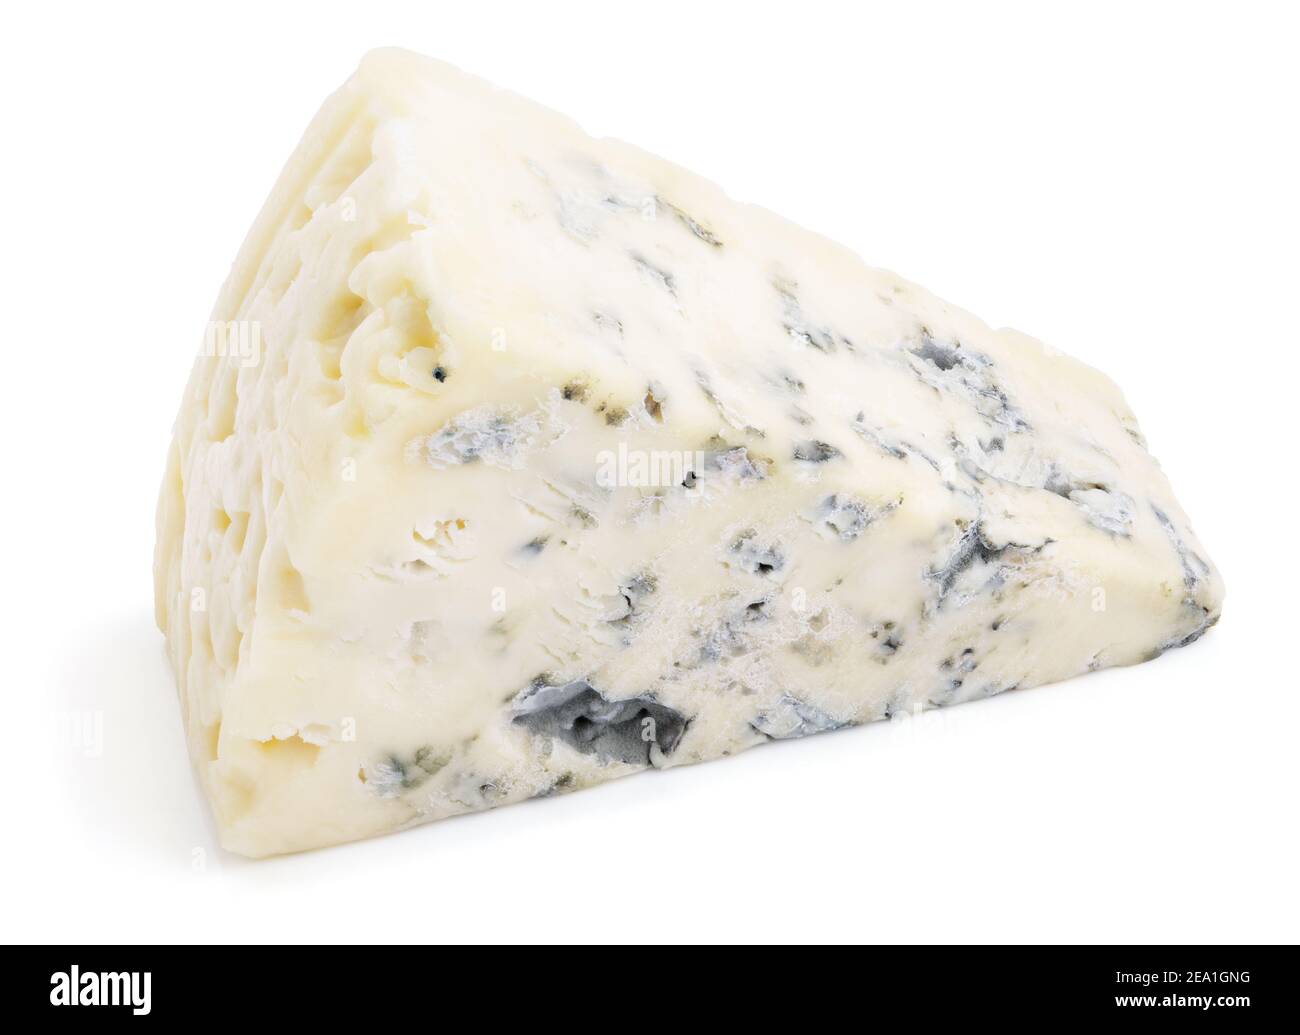 Wedge of soft blue cheese with mold isolated on white background. Blue cheese slice with clipping path Stock Photo